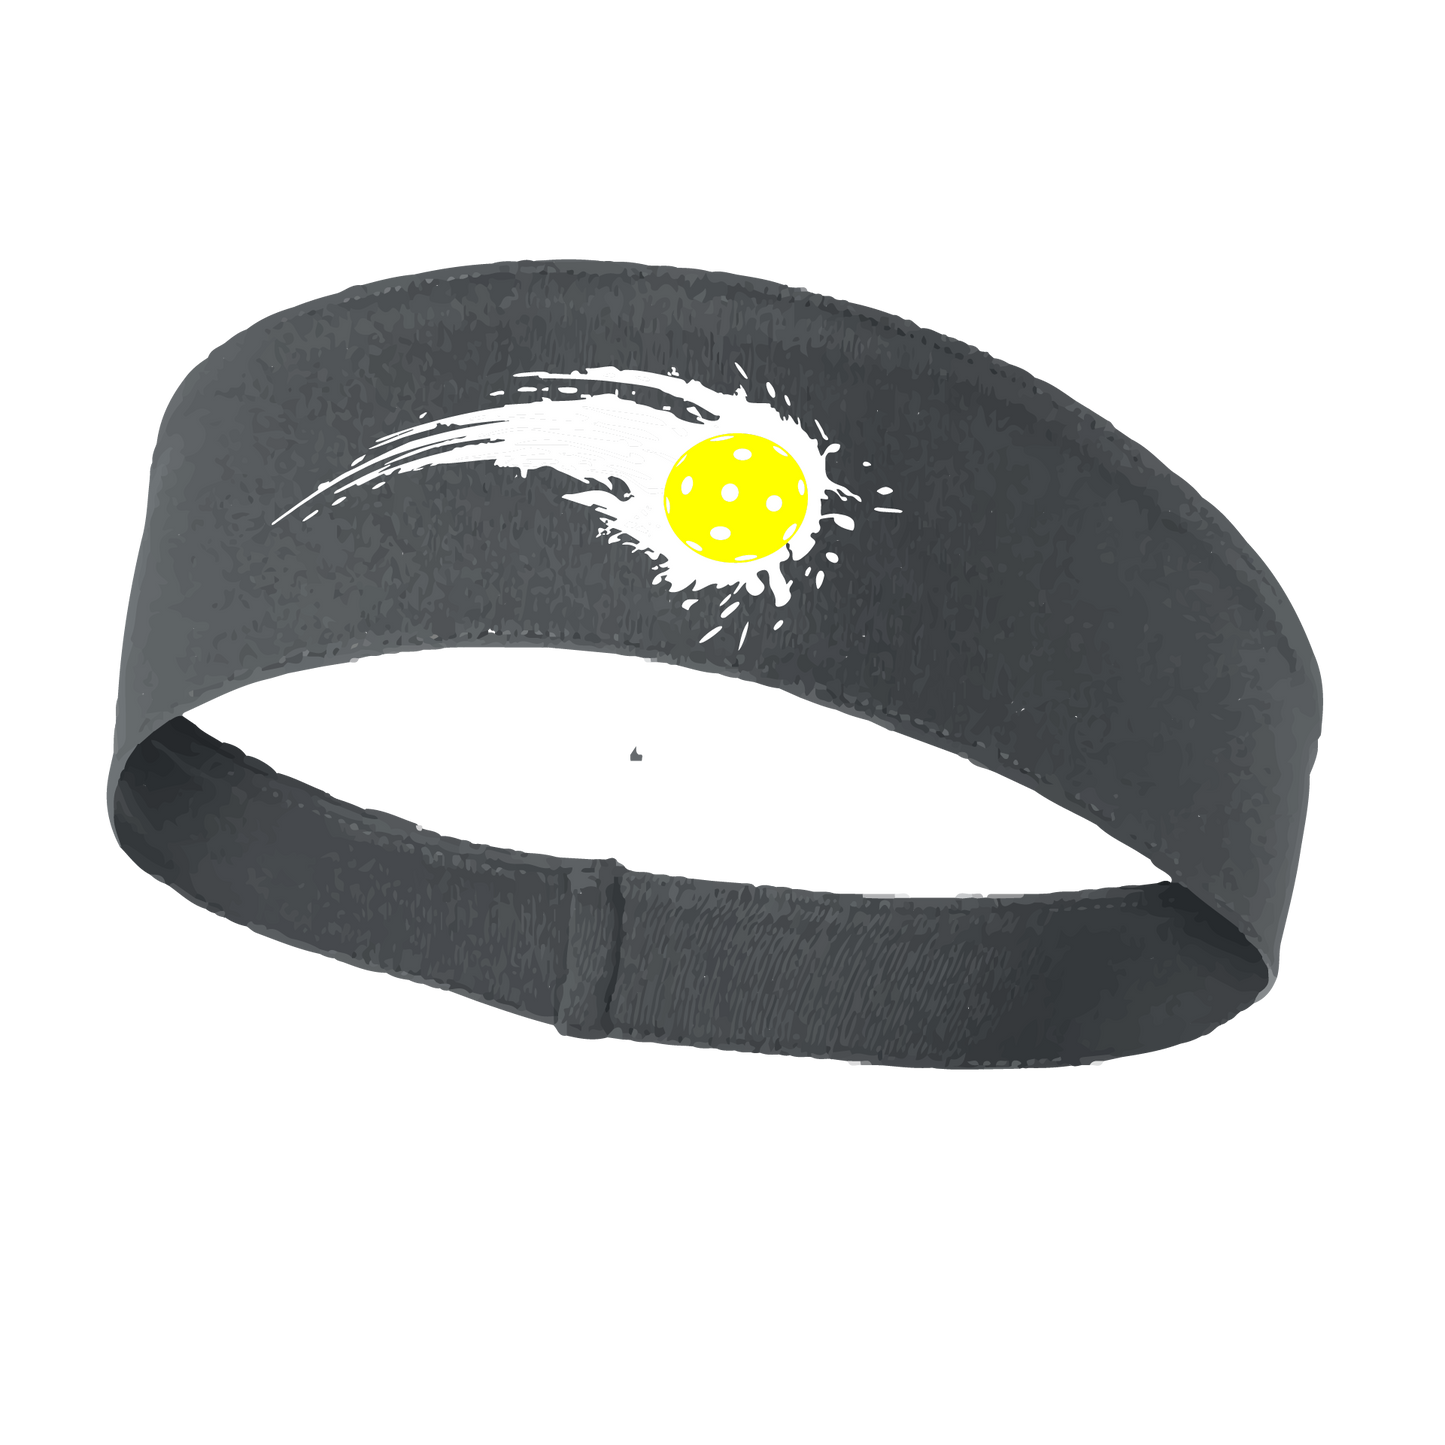 Pickleball Design: Pickleball impact white with yellow ball  This fun, pickleball designed, moisture-wicking headband narrows in the back to fit more securely. Single-needle top-stitched edging. These headbands come in a variety of colors. Truly shows your love for the sport of pickleball!!